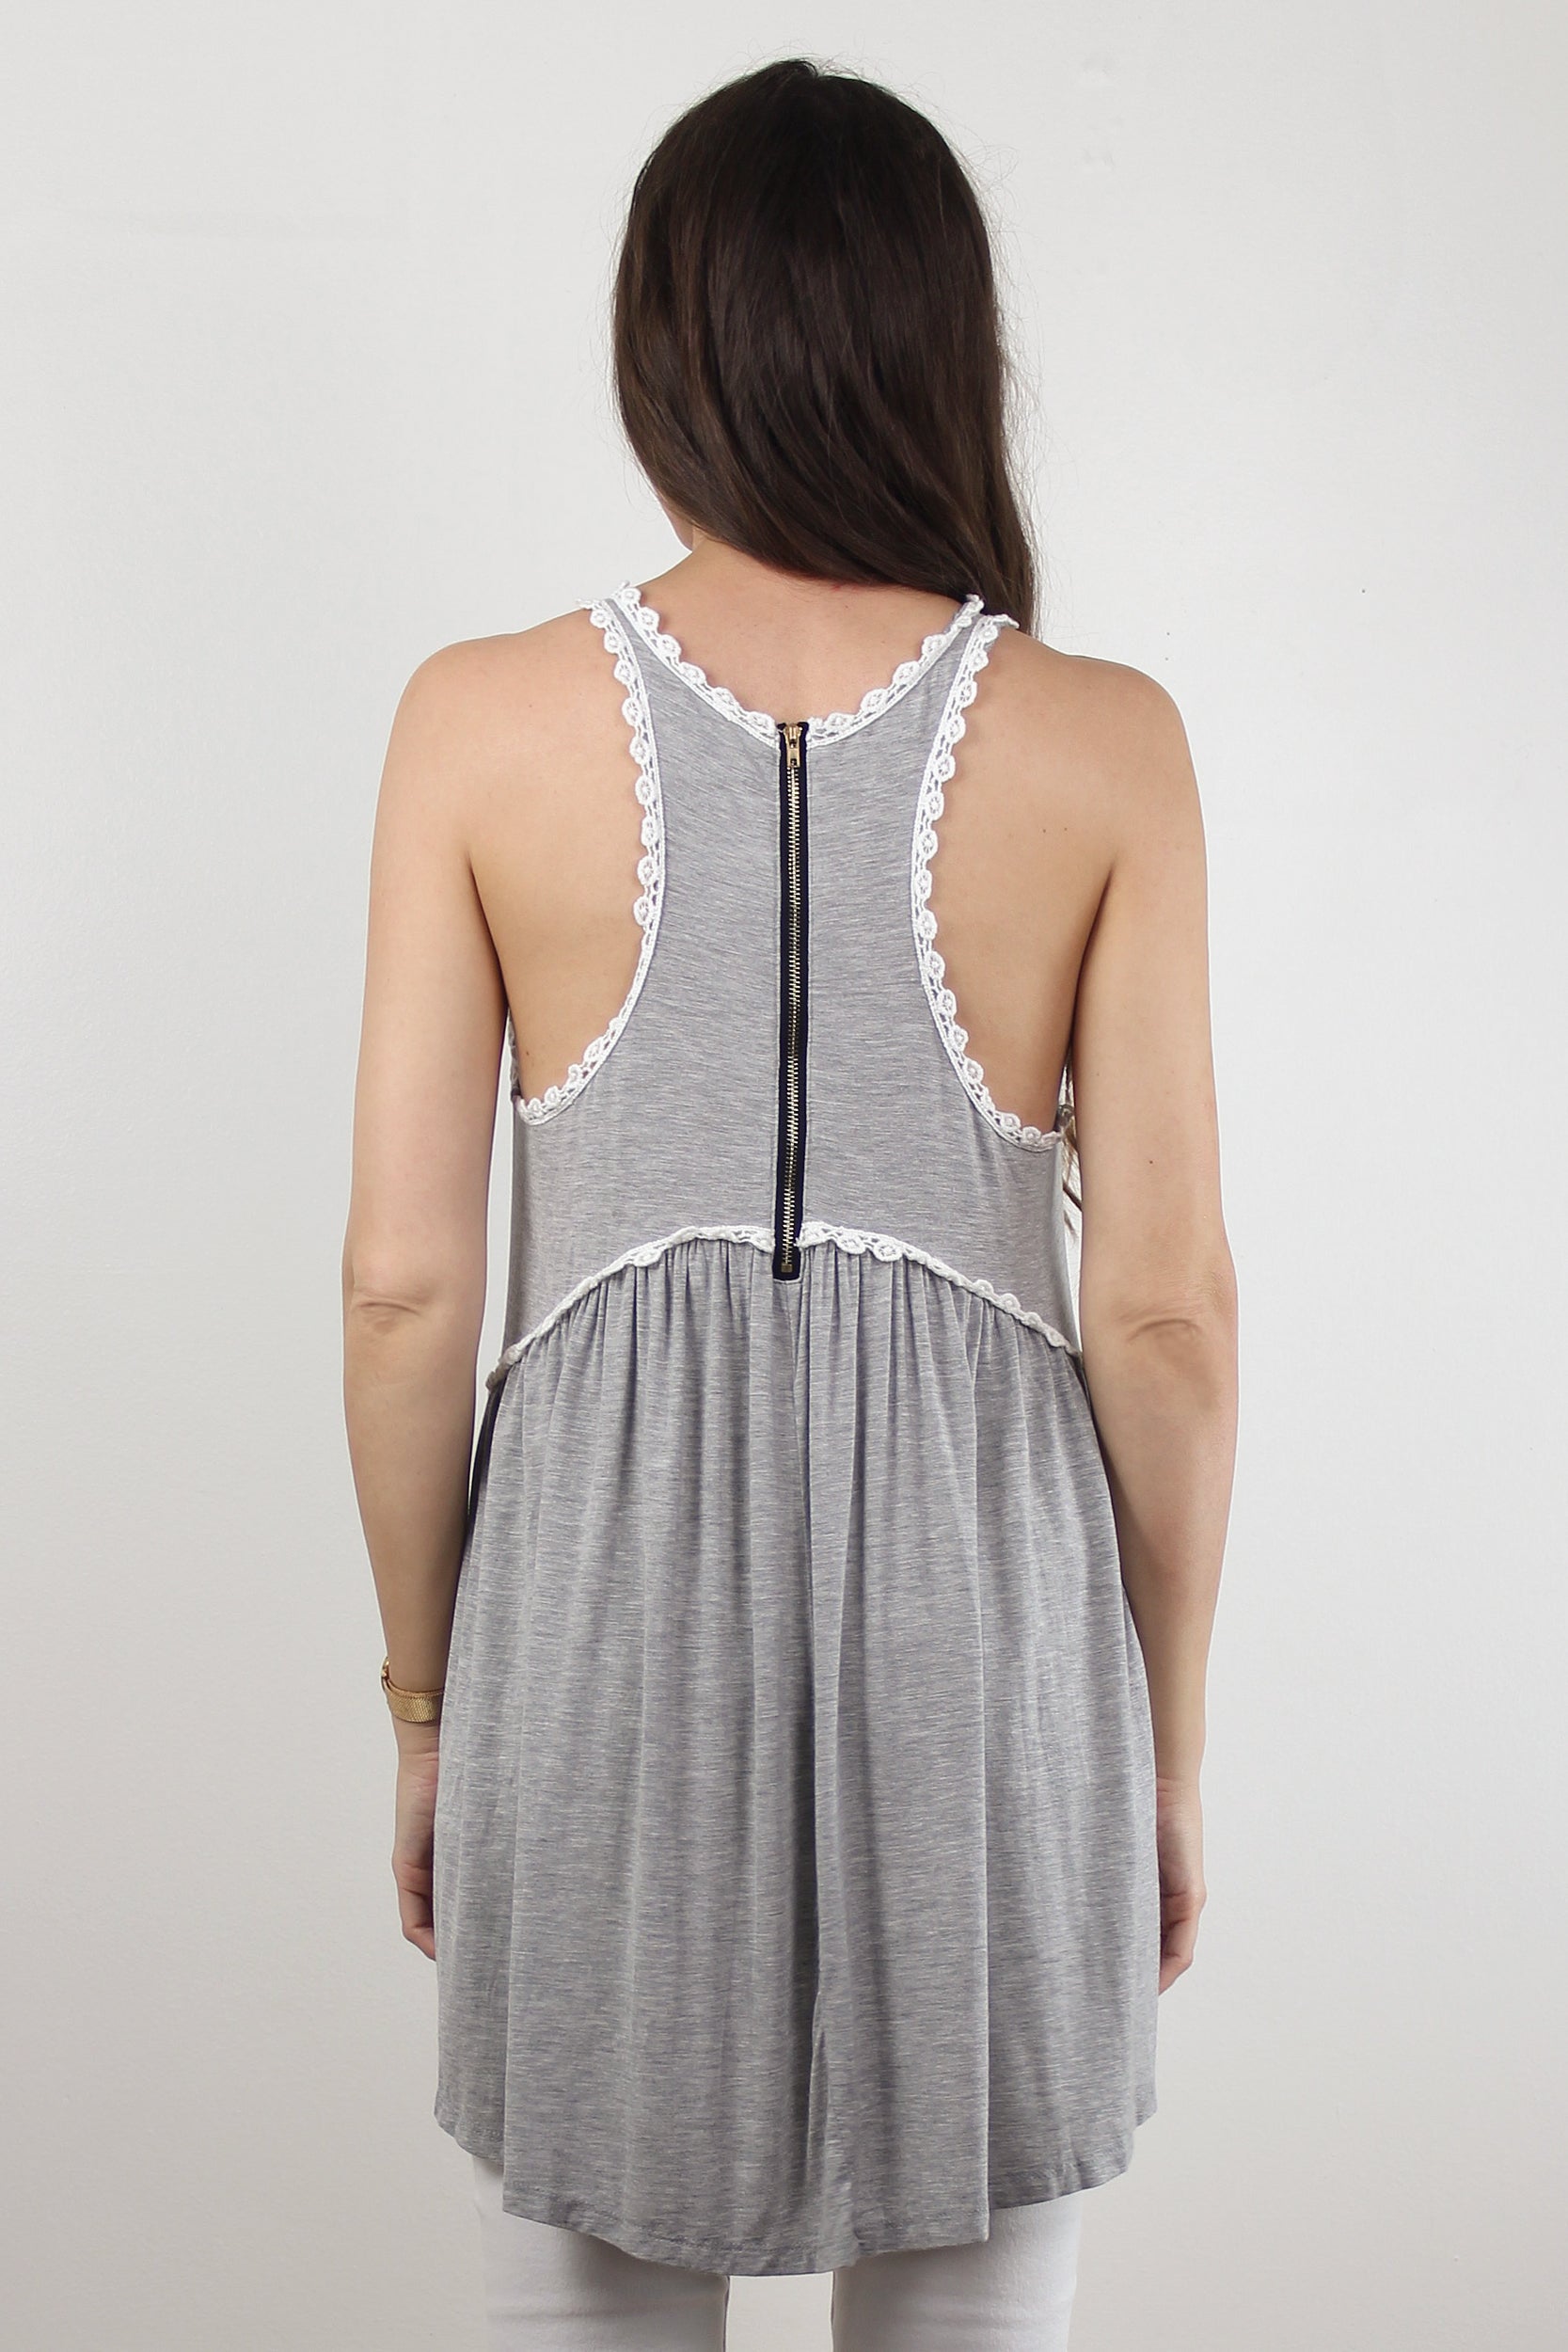 Babydoll style top, with exposed back zipper, in heather grey.